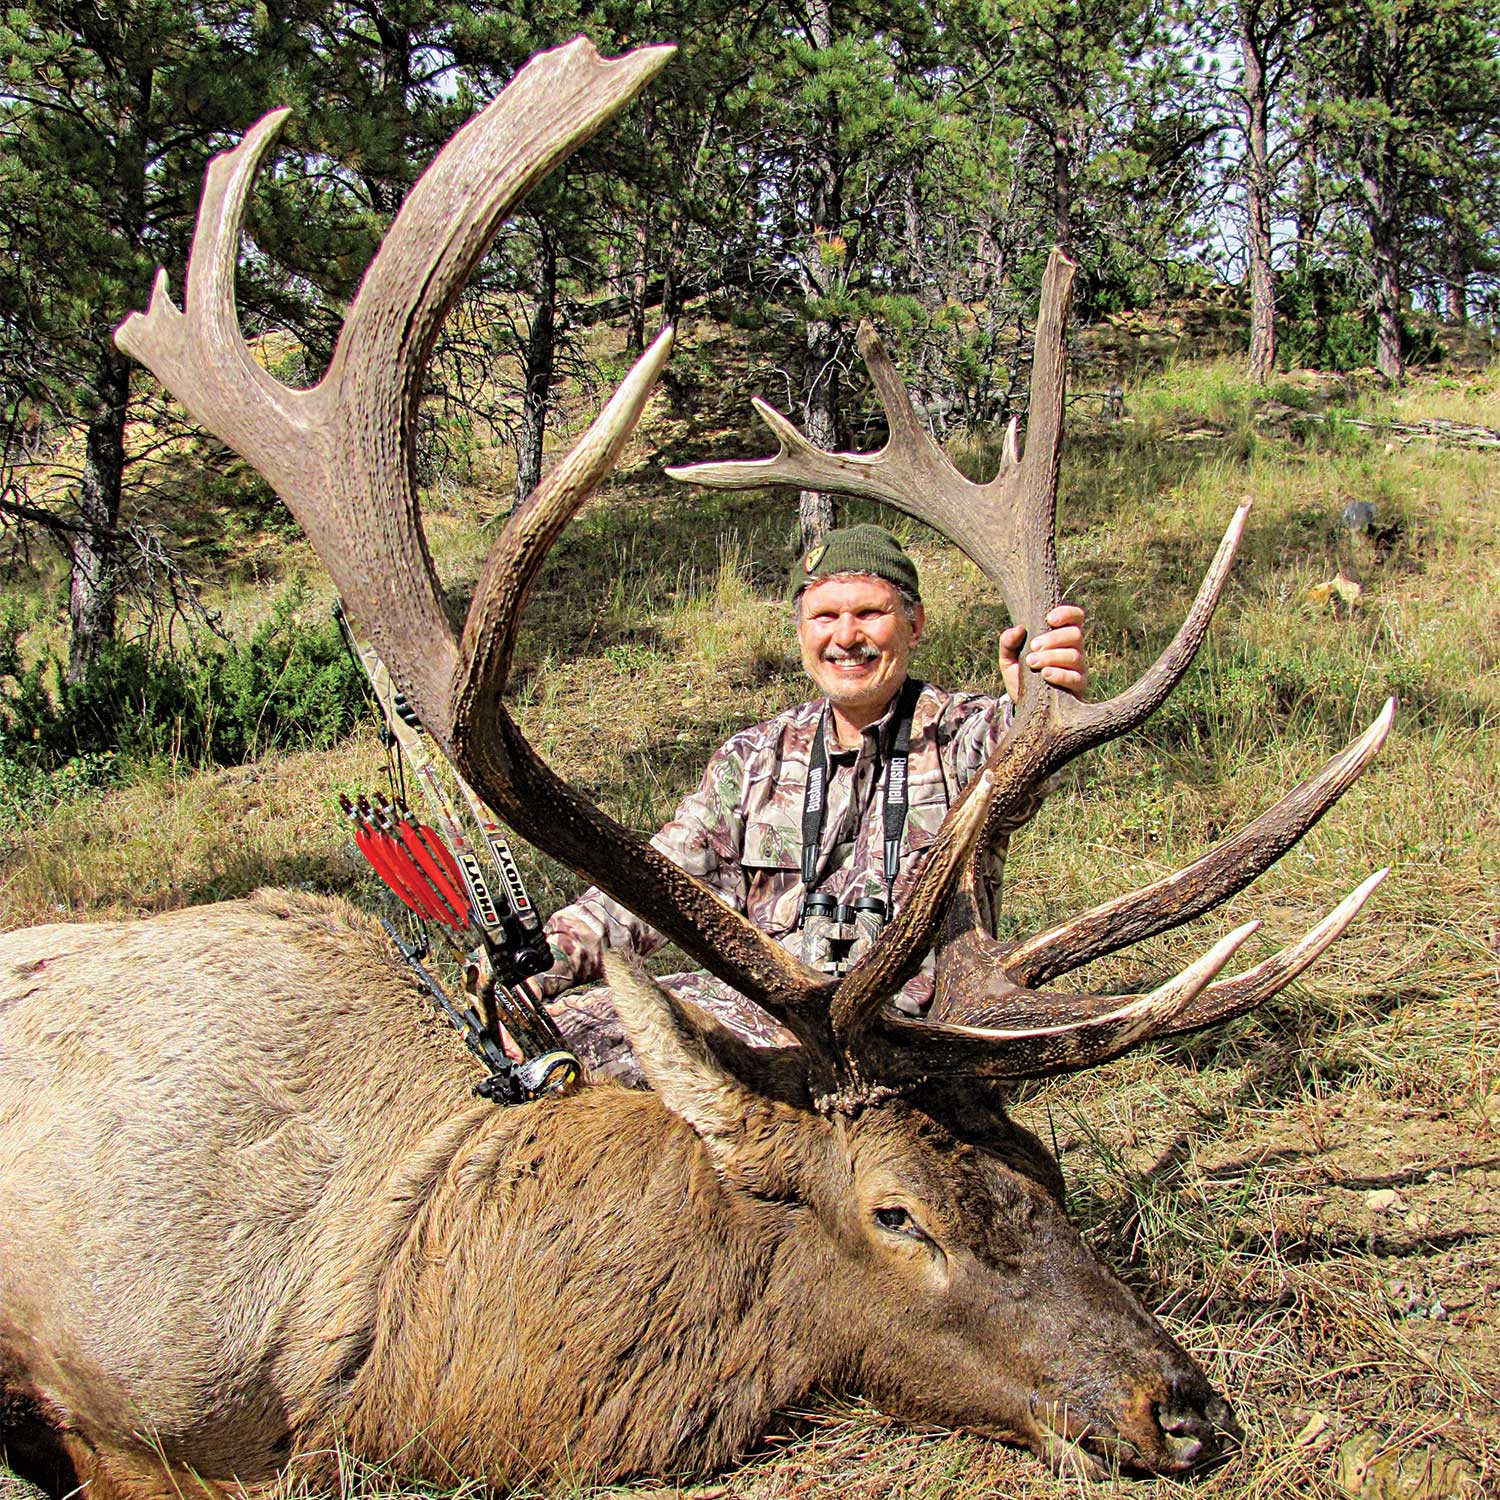 Make the Perfect Archery Shot on a Giant Bull Elk